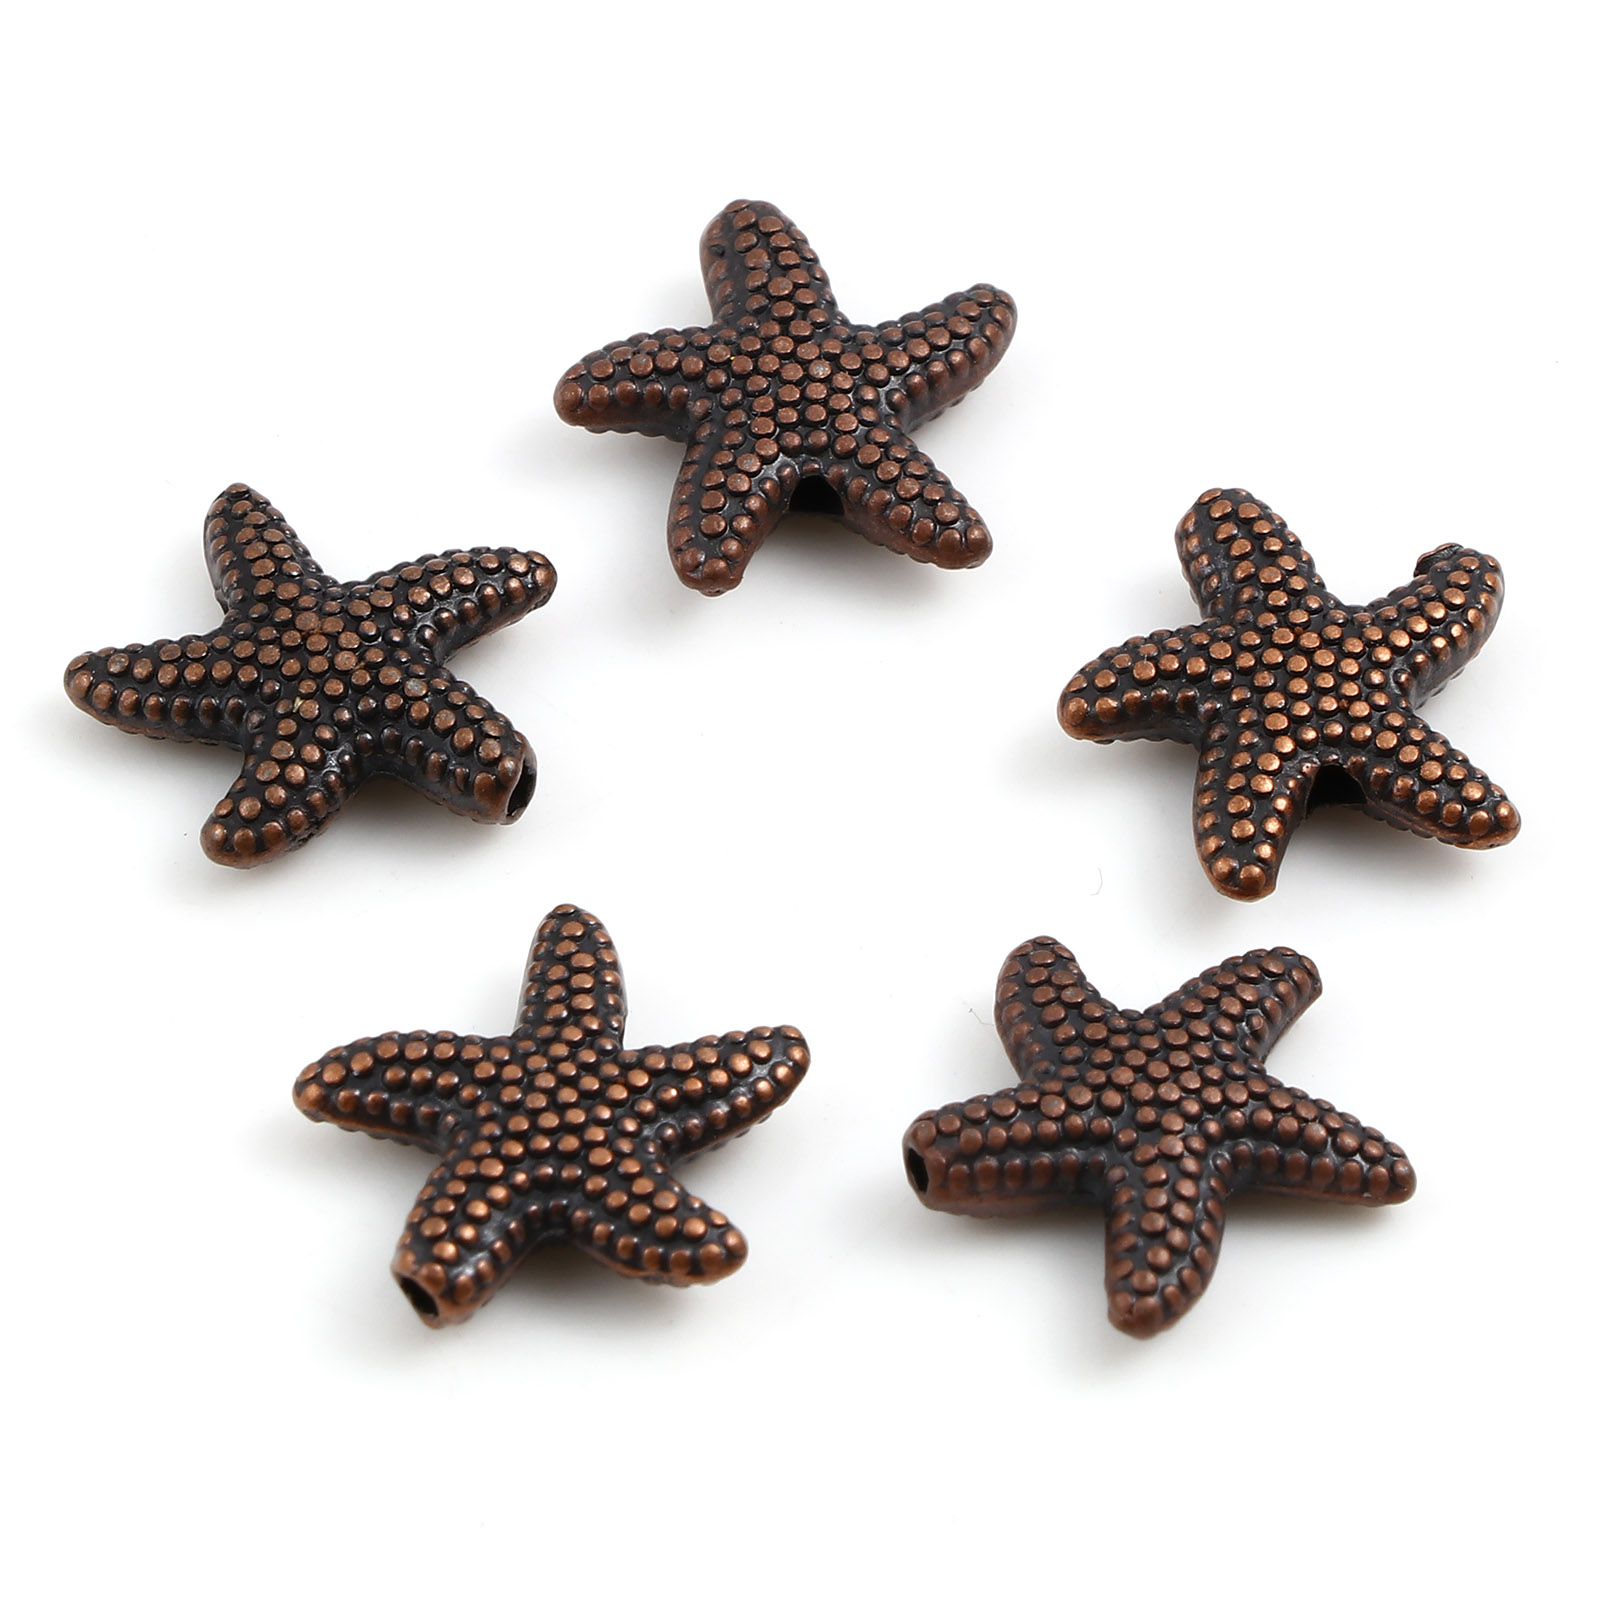 Picture of Zinc Based Alloy Ocean Jewelry Spacer Beads Star Fish Antique Copper About 14mm x 13.5mm, Hole: Approx 1.3mm, 20 PCs